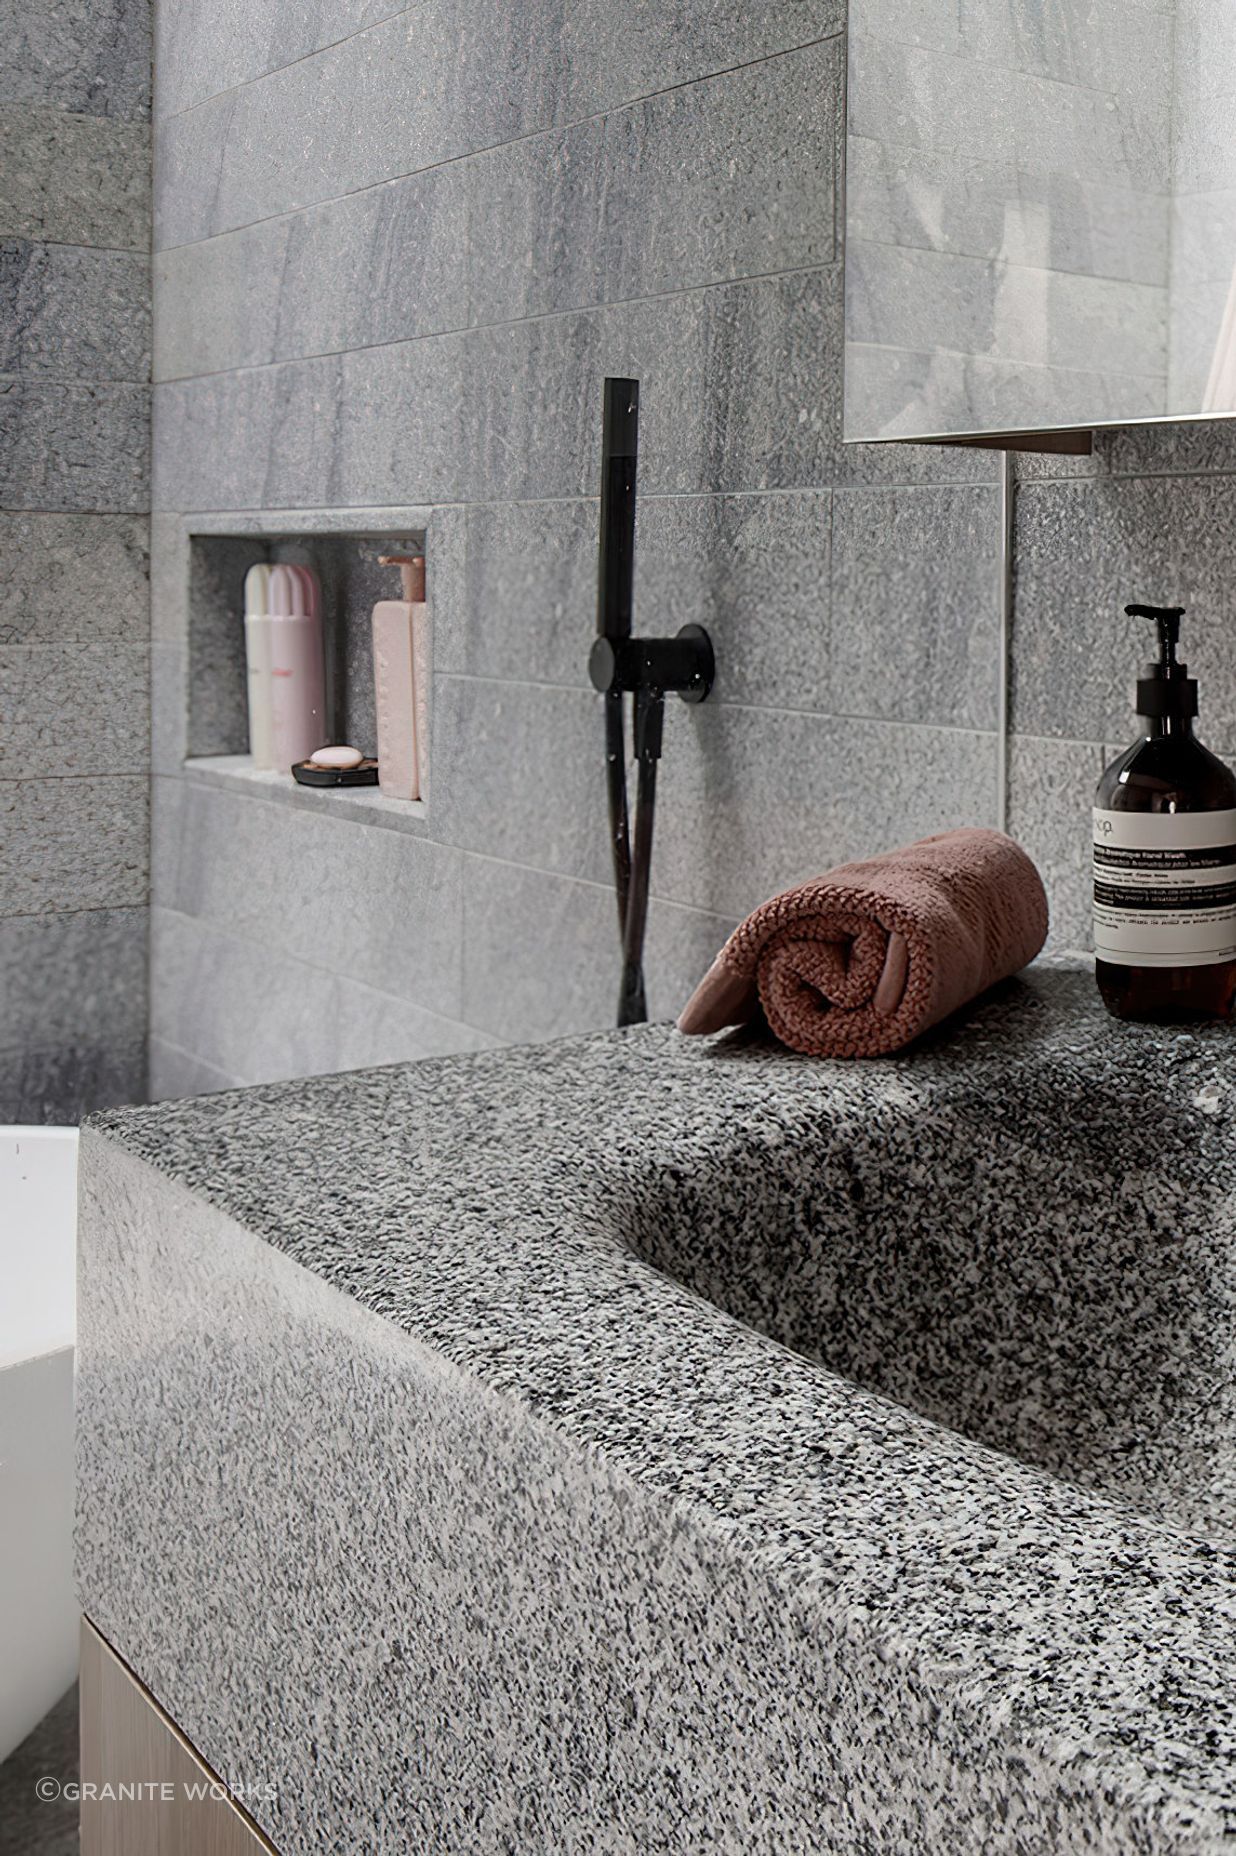 Aston grey granite is used extensively throughout the bathrooms.